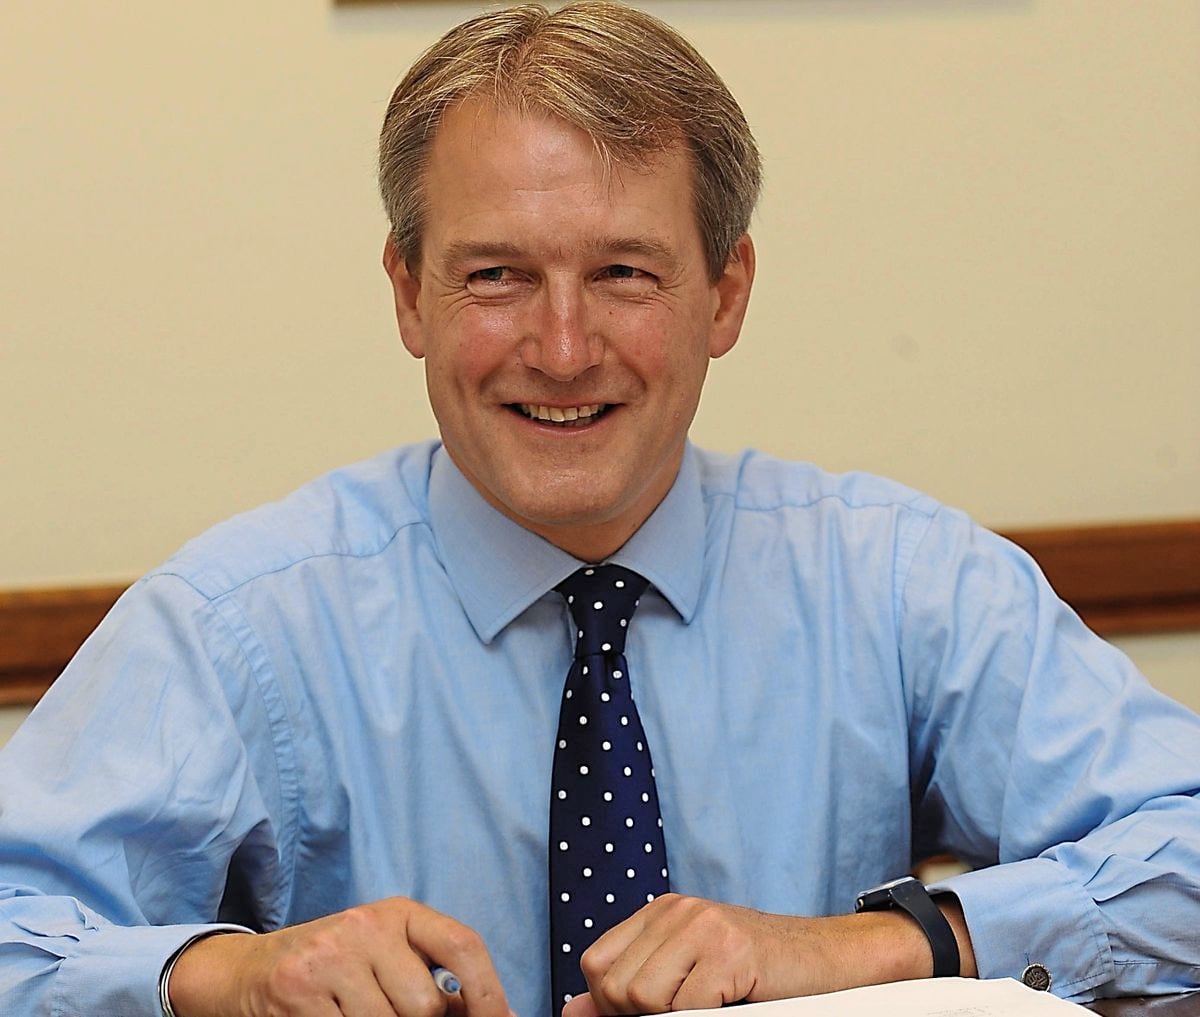 Brexit An Opportunity For Farming Says Mp Owen Paterson Shropshire Star 0594